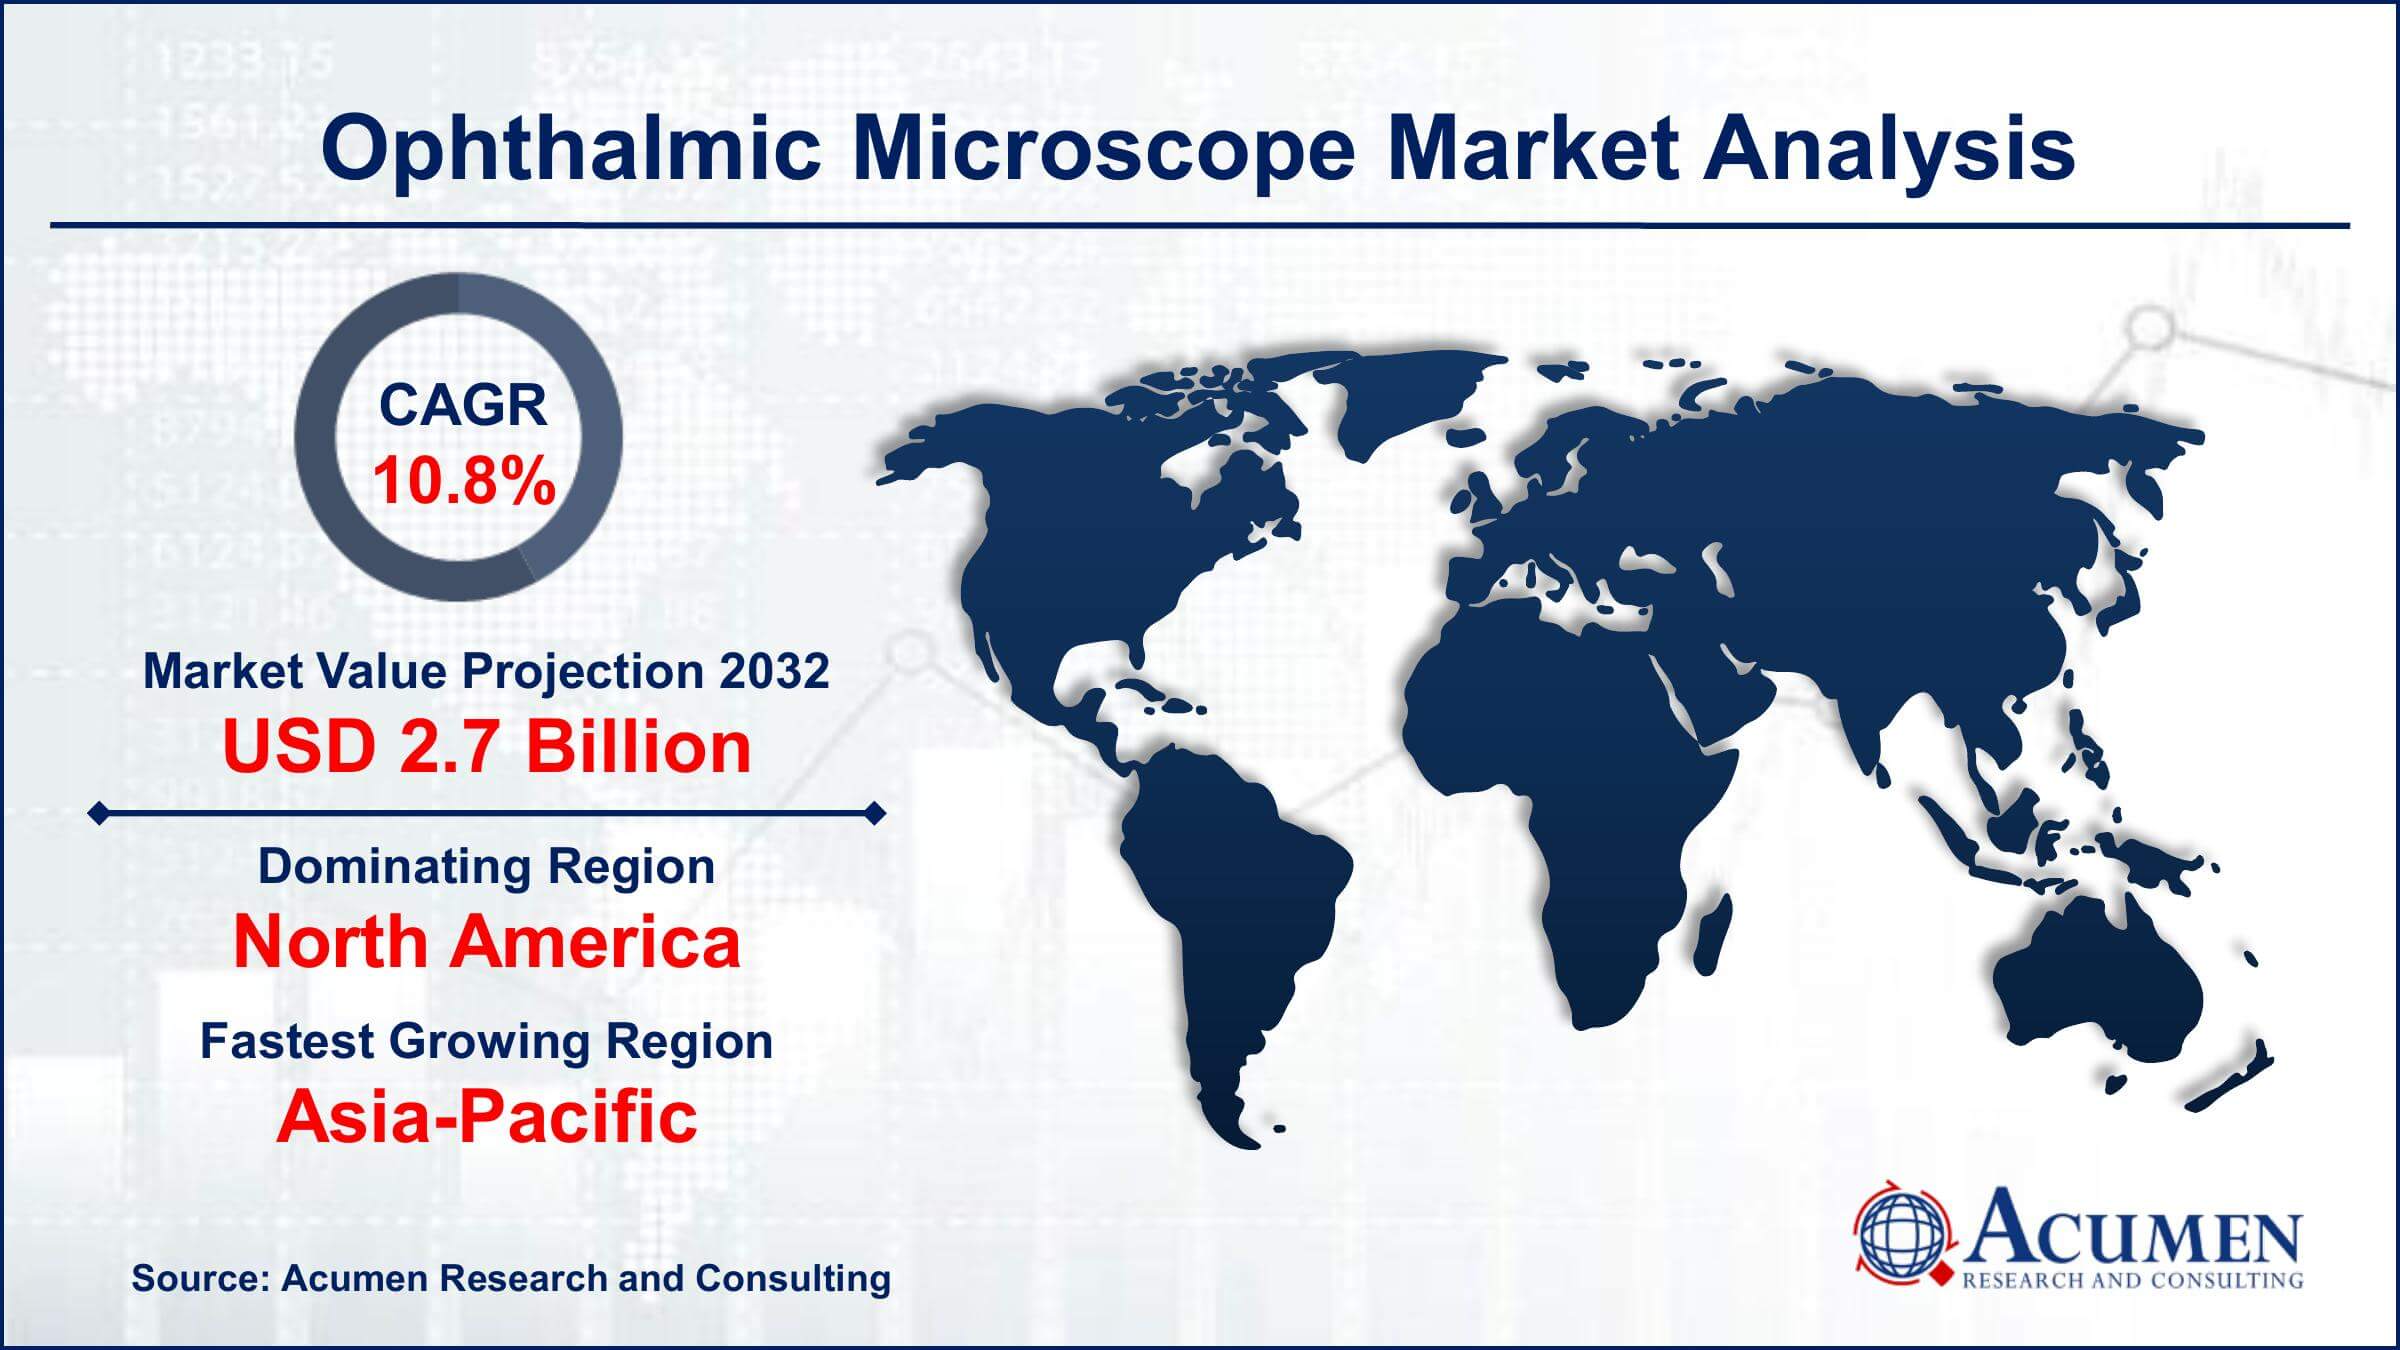 Global Ophthalmic Microscope Market Trends